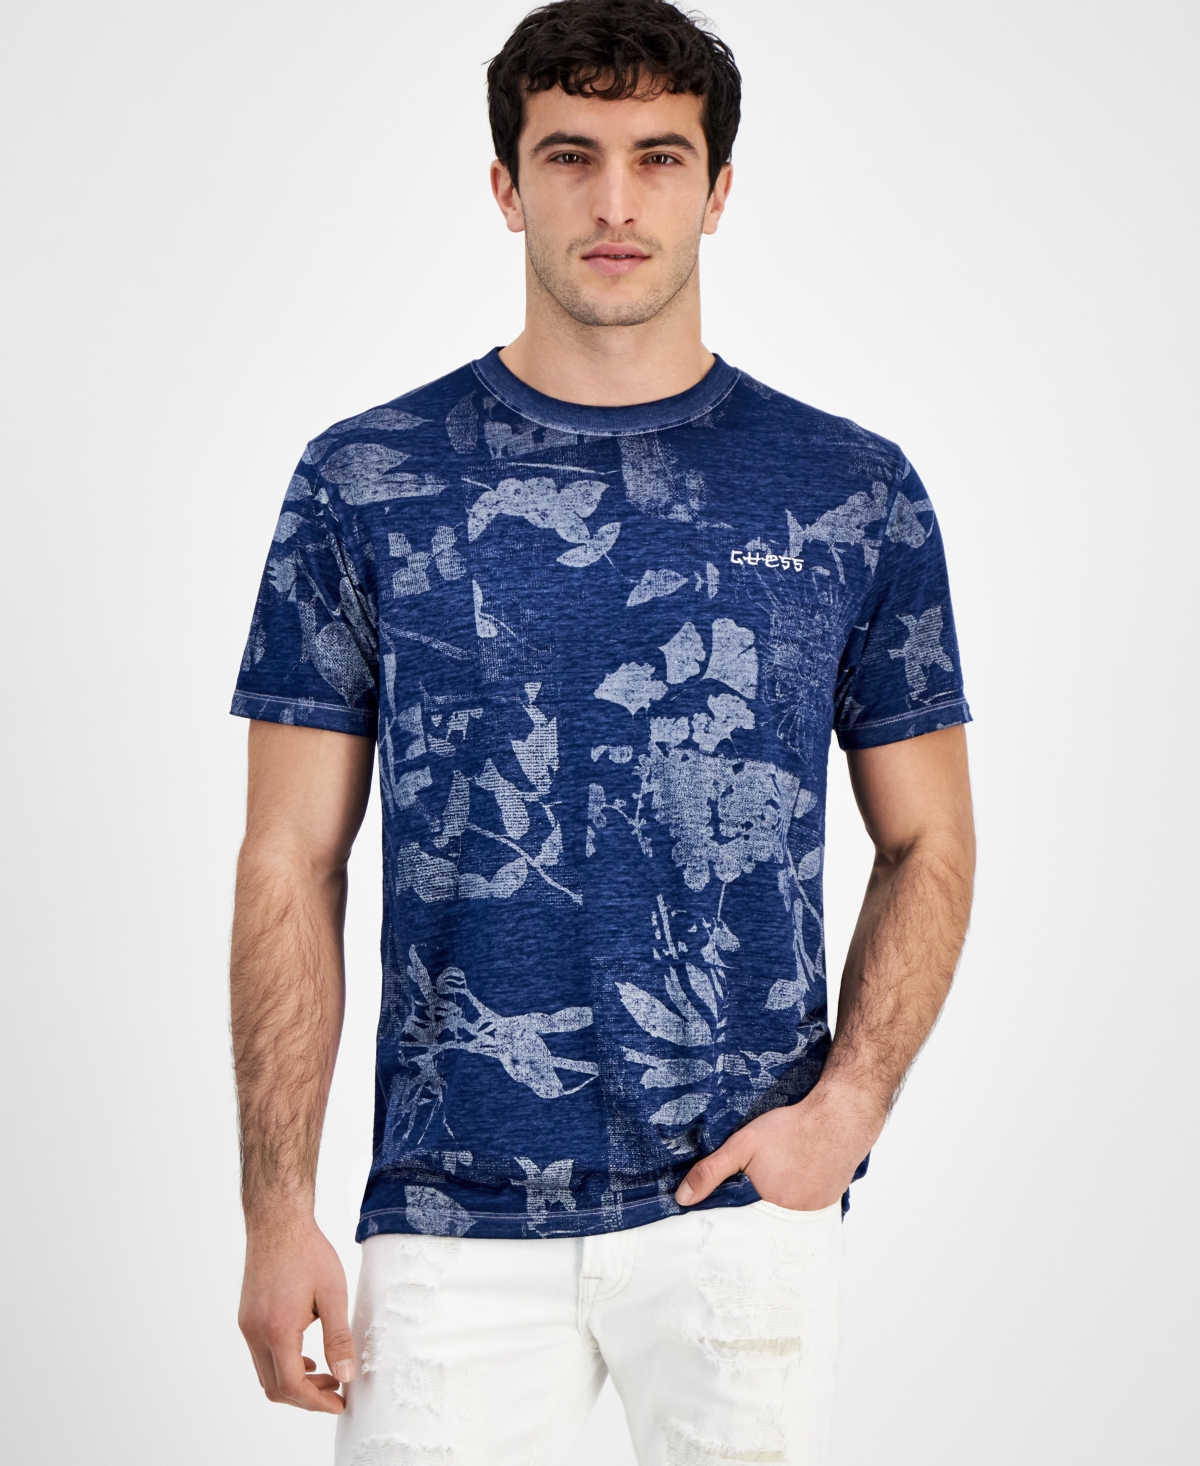 Guess Men's Allover Leaf Print Short Sleeve Crewneck T-shirt In Blue And White Leaves Aop